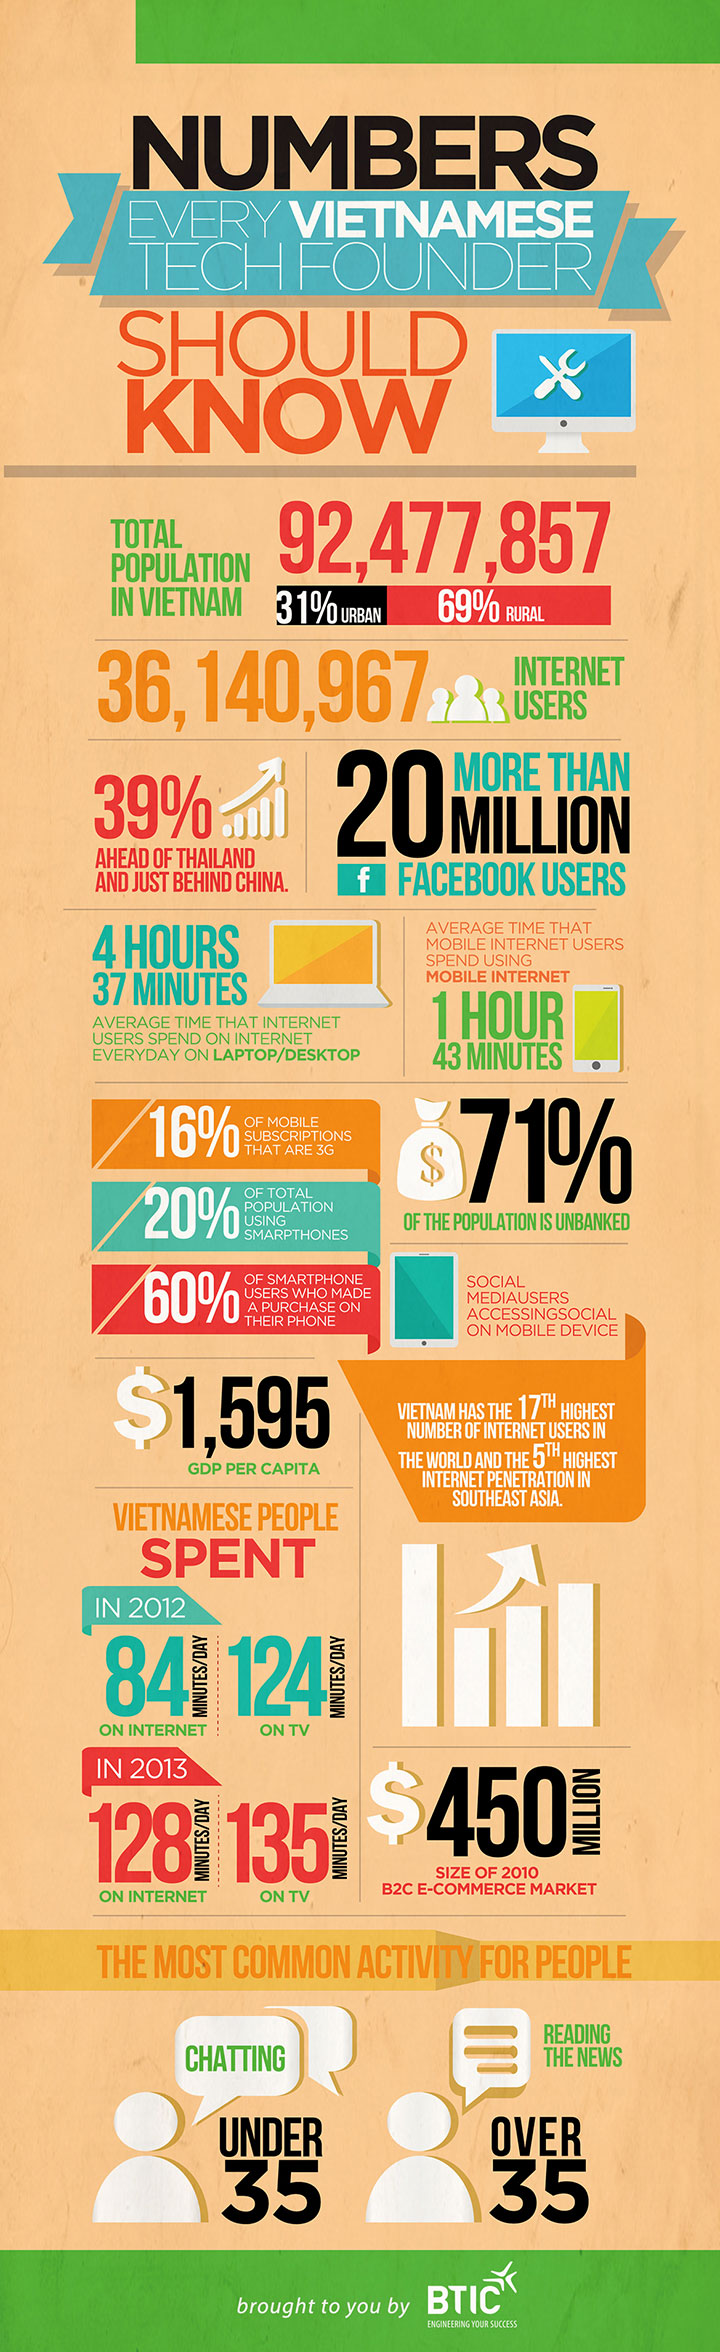 Numbers every vietnamese tech founder should know infographic